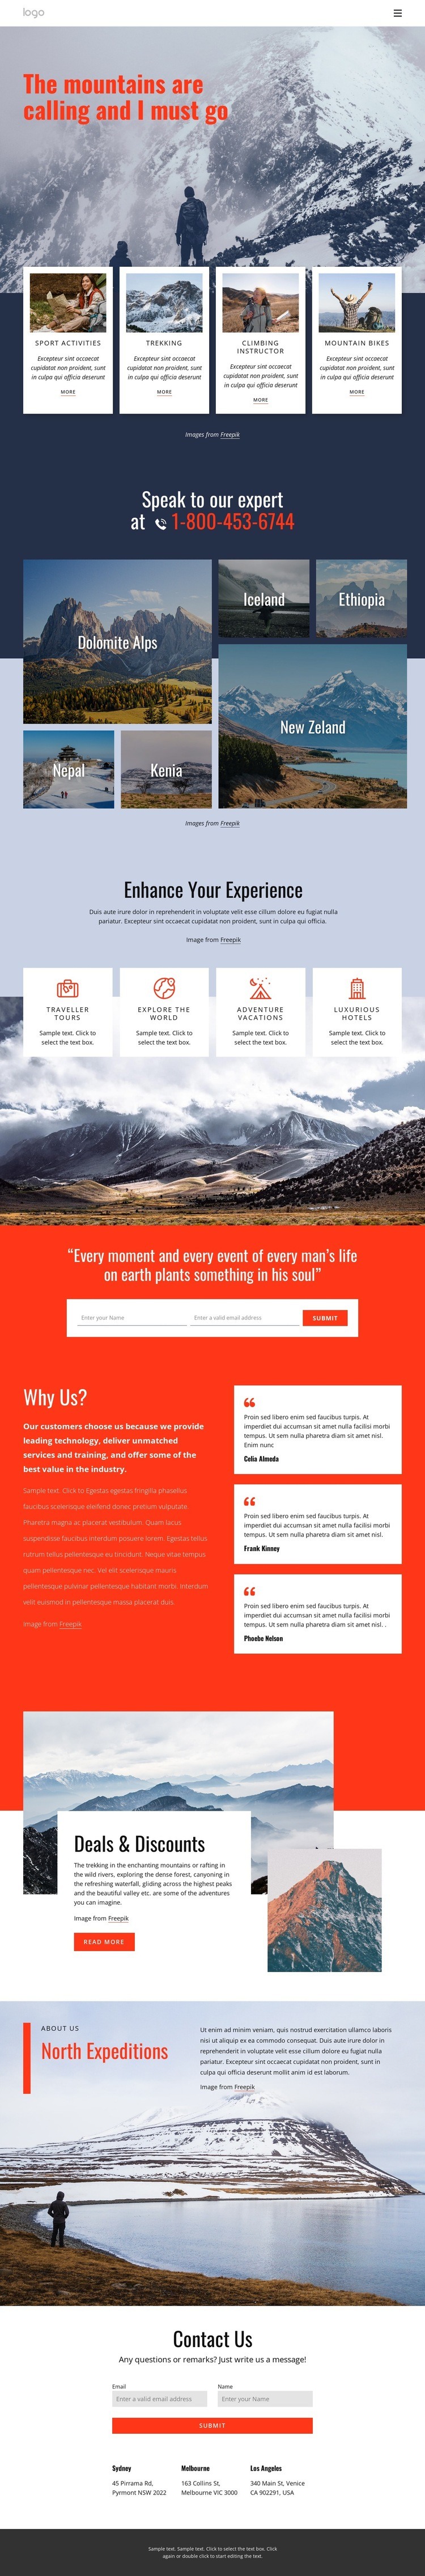 We offer hiking tours Wix Template Alternative